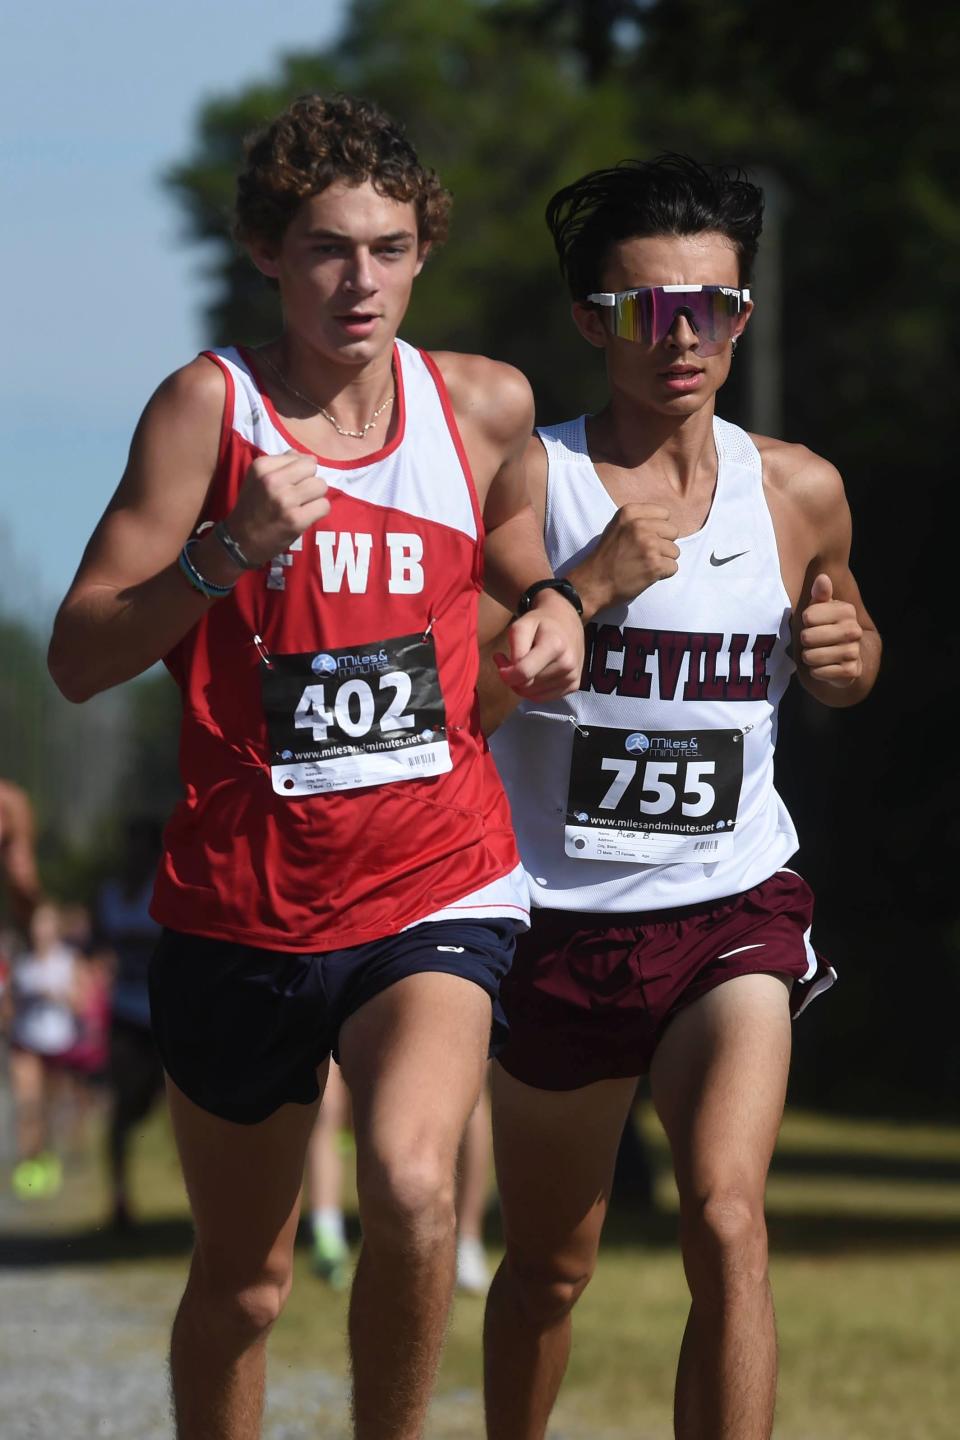 Fort Walton Beach's Grant Chastian, left, and Niceville's Alex Buena finished second and third place respectively in the Okaloosa County Cross Country Championships held Thursday, Oct. 13, 2022 at the Howard Hill Soccer Complex in Niceville.